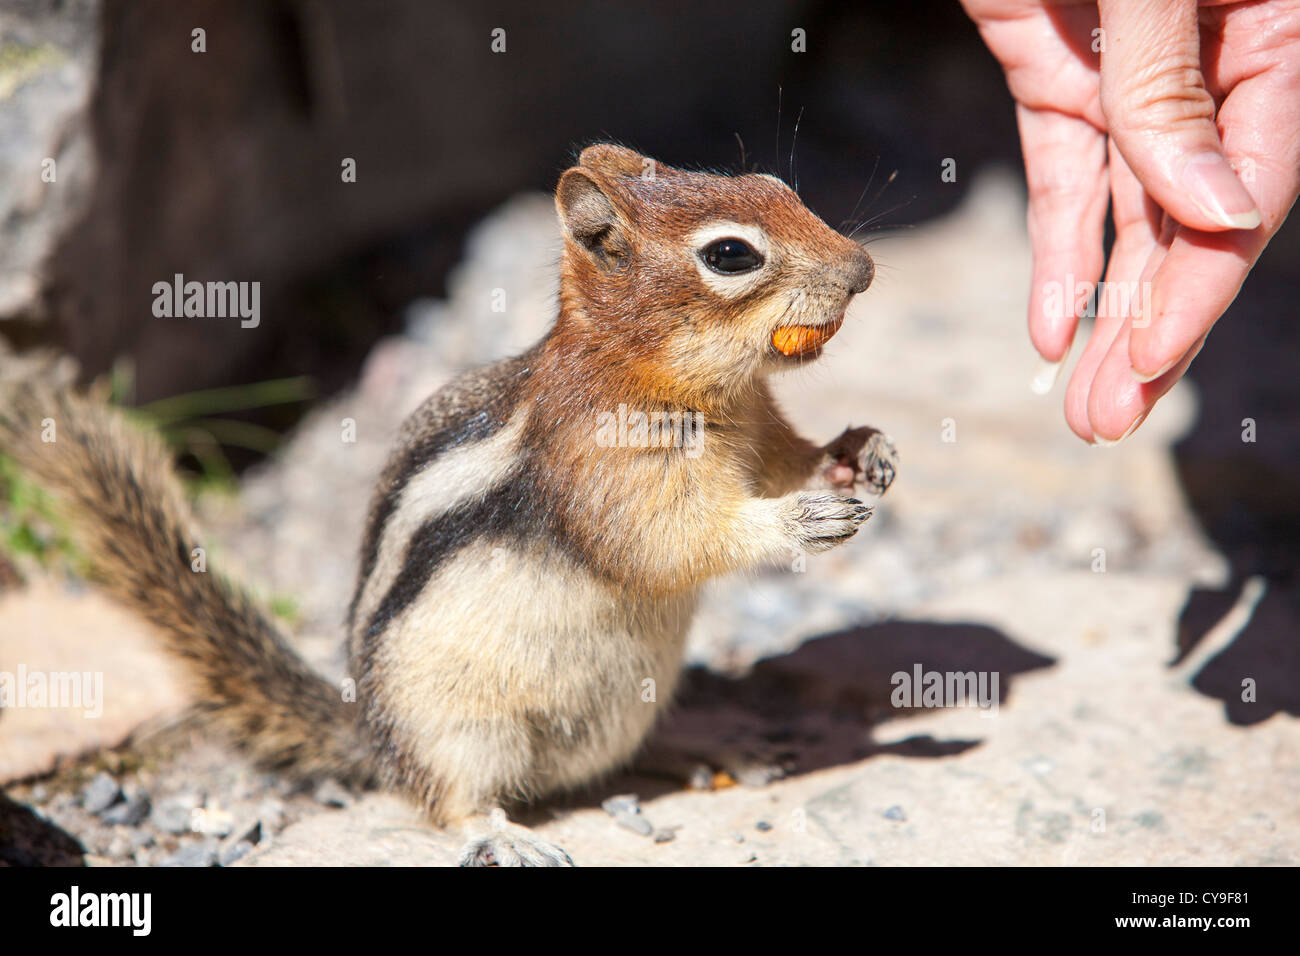 A Chipmunk in the Canadian Rockies being fed by a tourist. Stock Photo